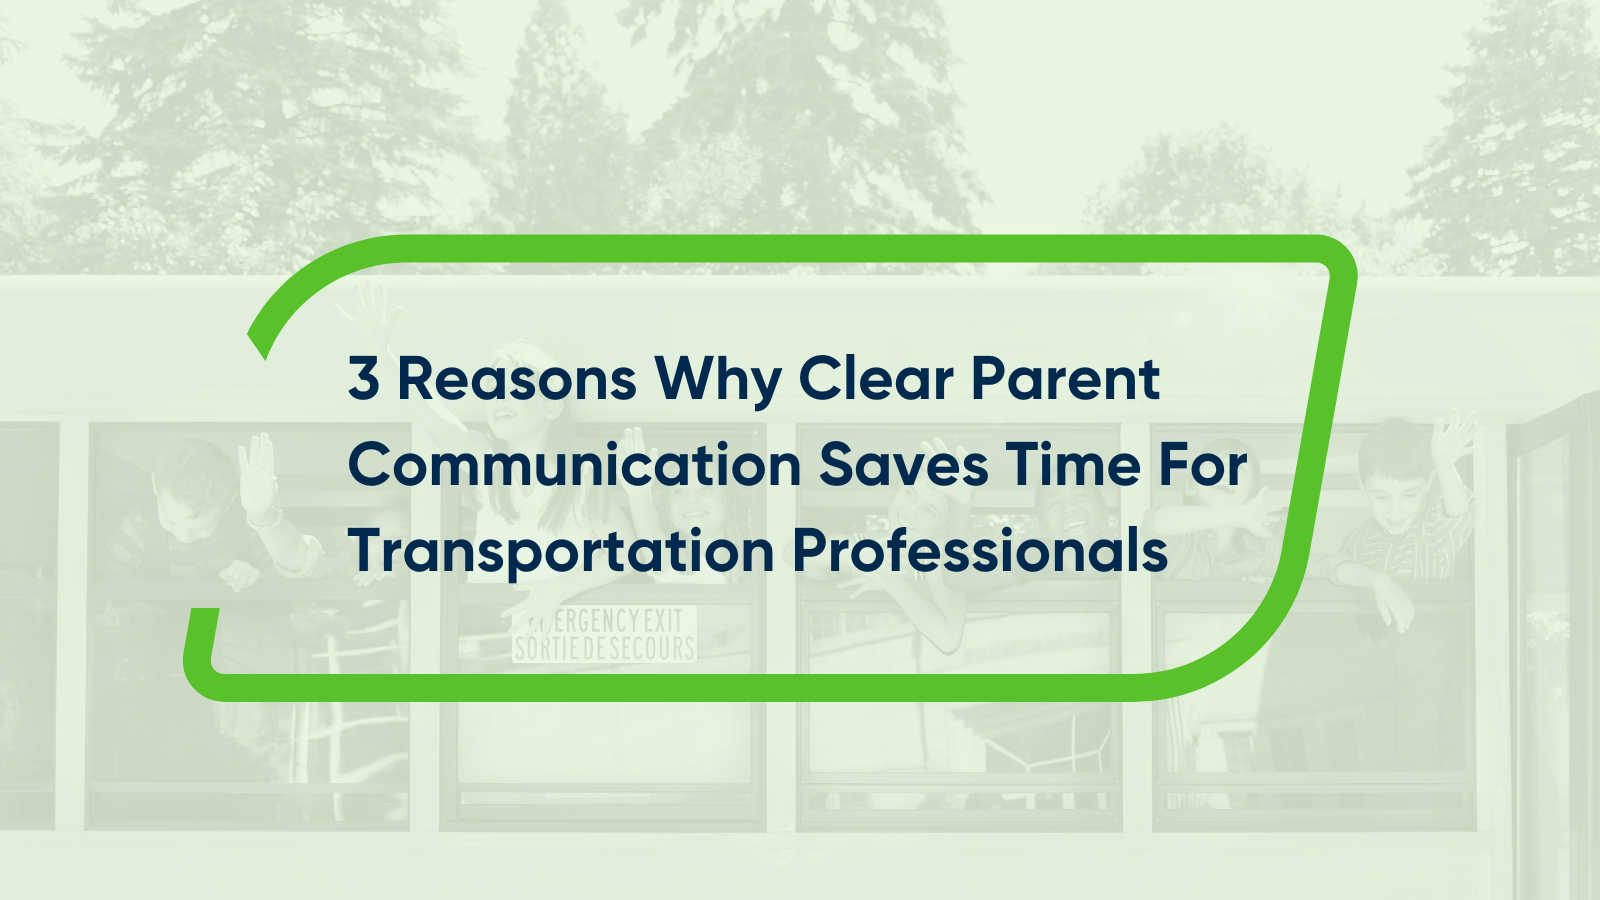 3 Reasons Why Clear Parent Communication Saves Time For Transportation Professionals